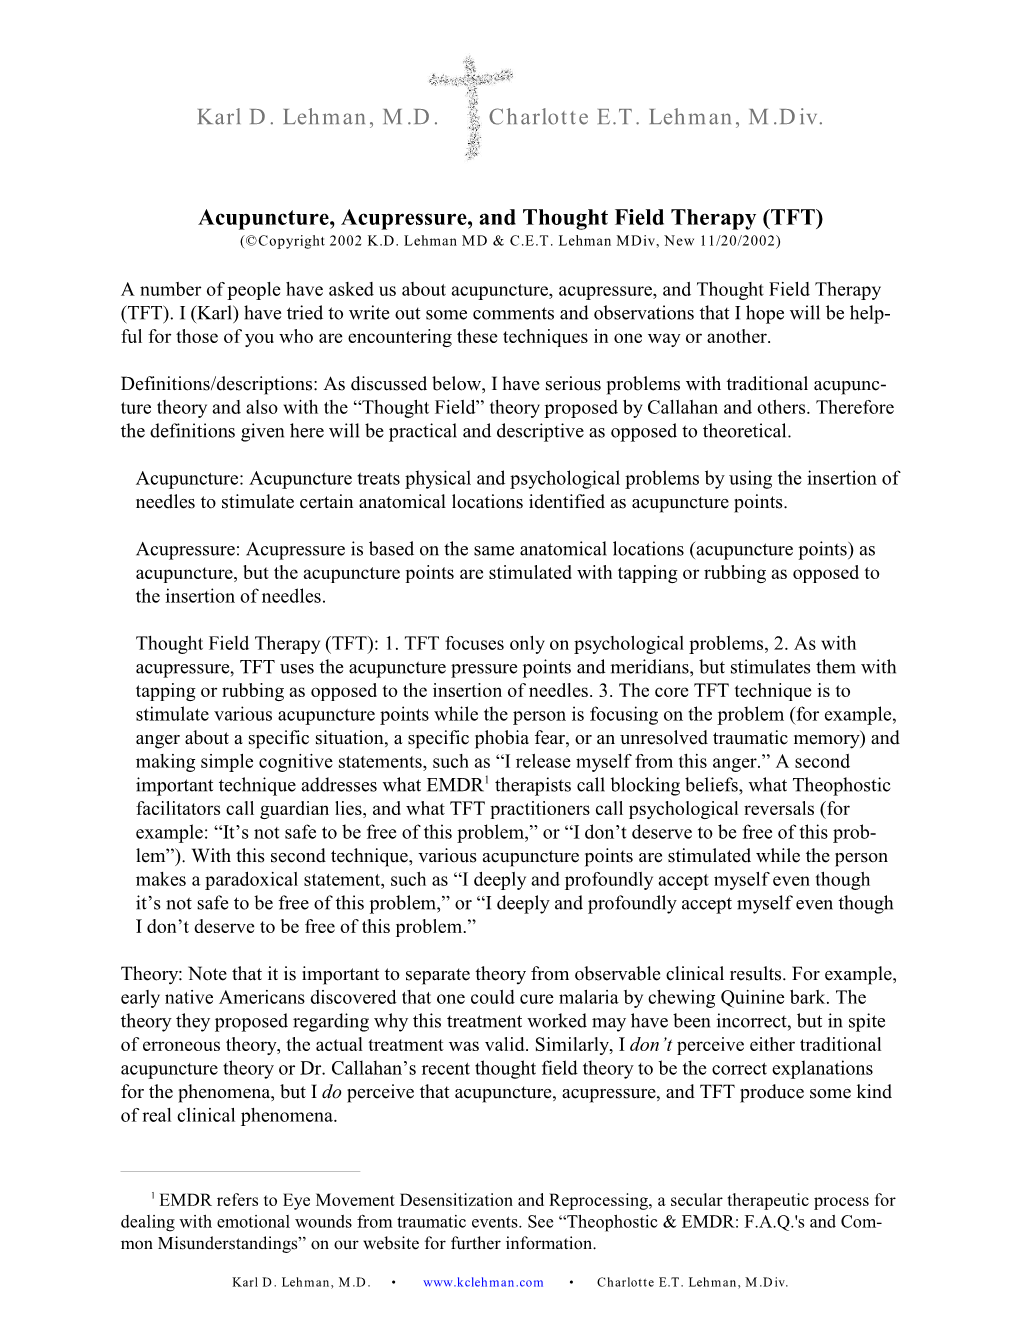 Acupuncture, Acupressure, and Thought Field Therapy (TFT) (©Copyright 2002 K.D